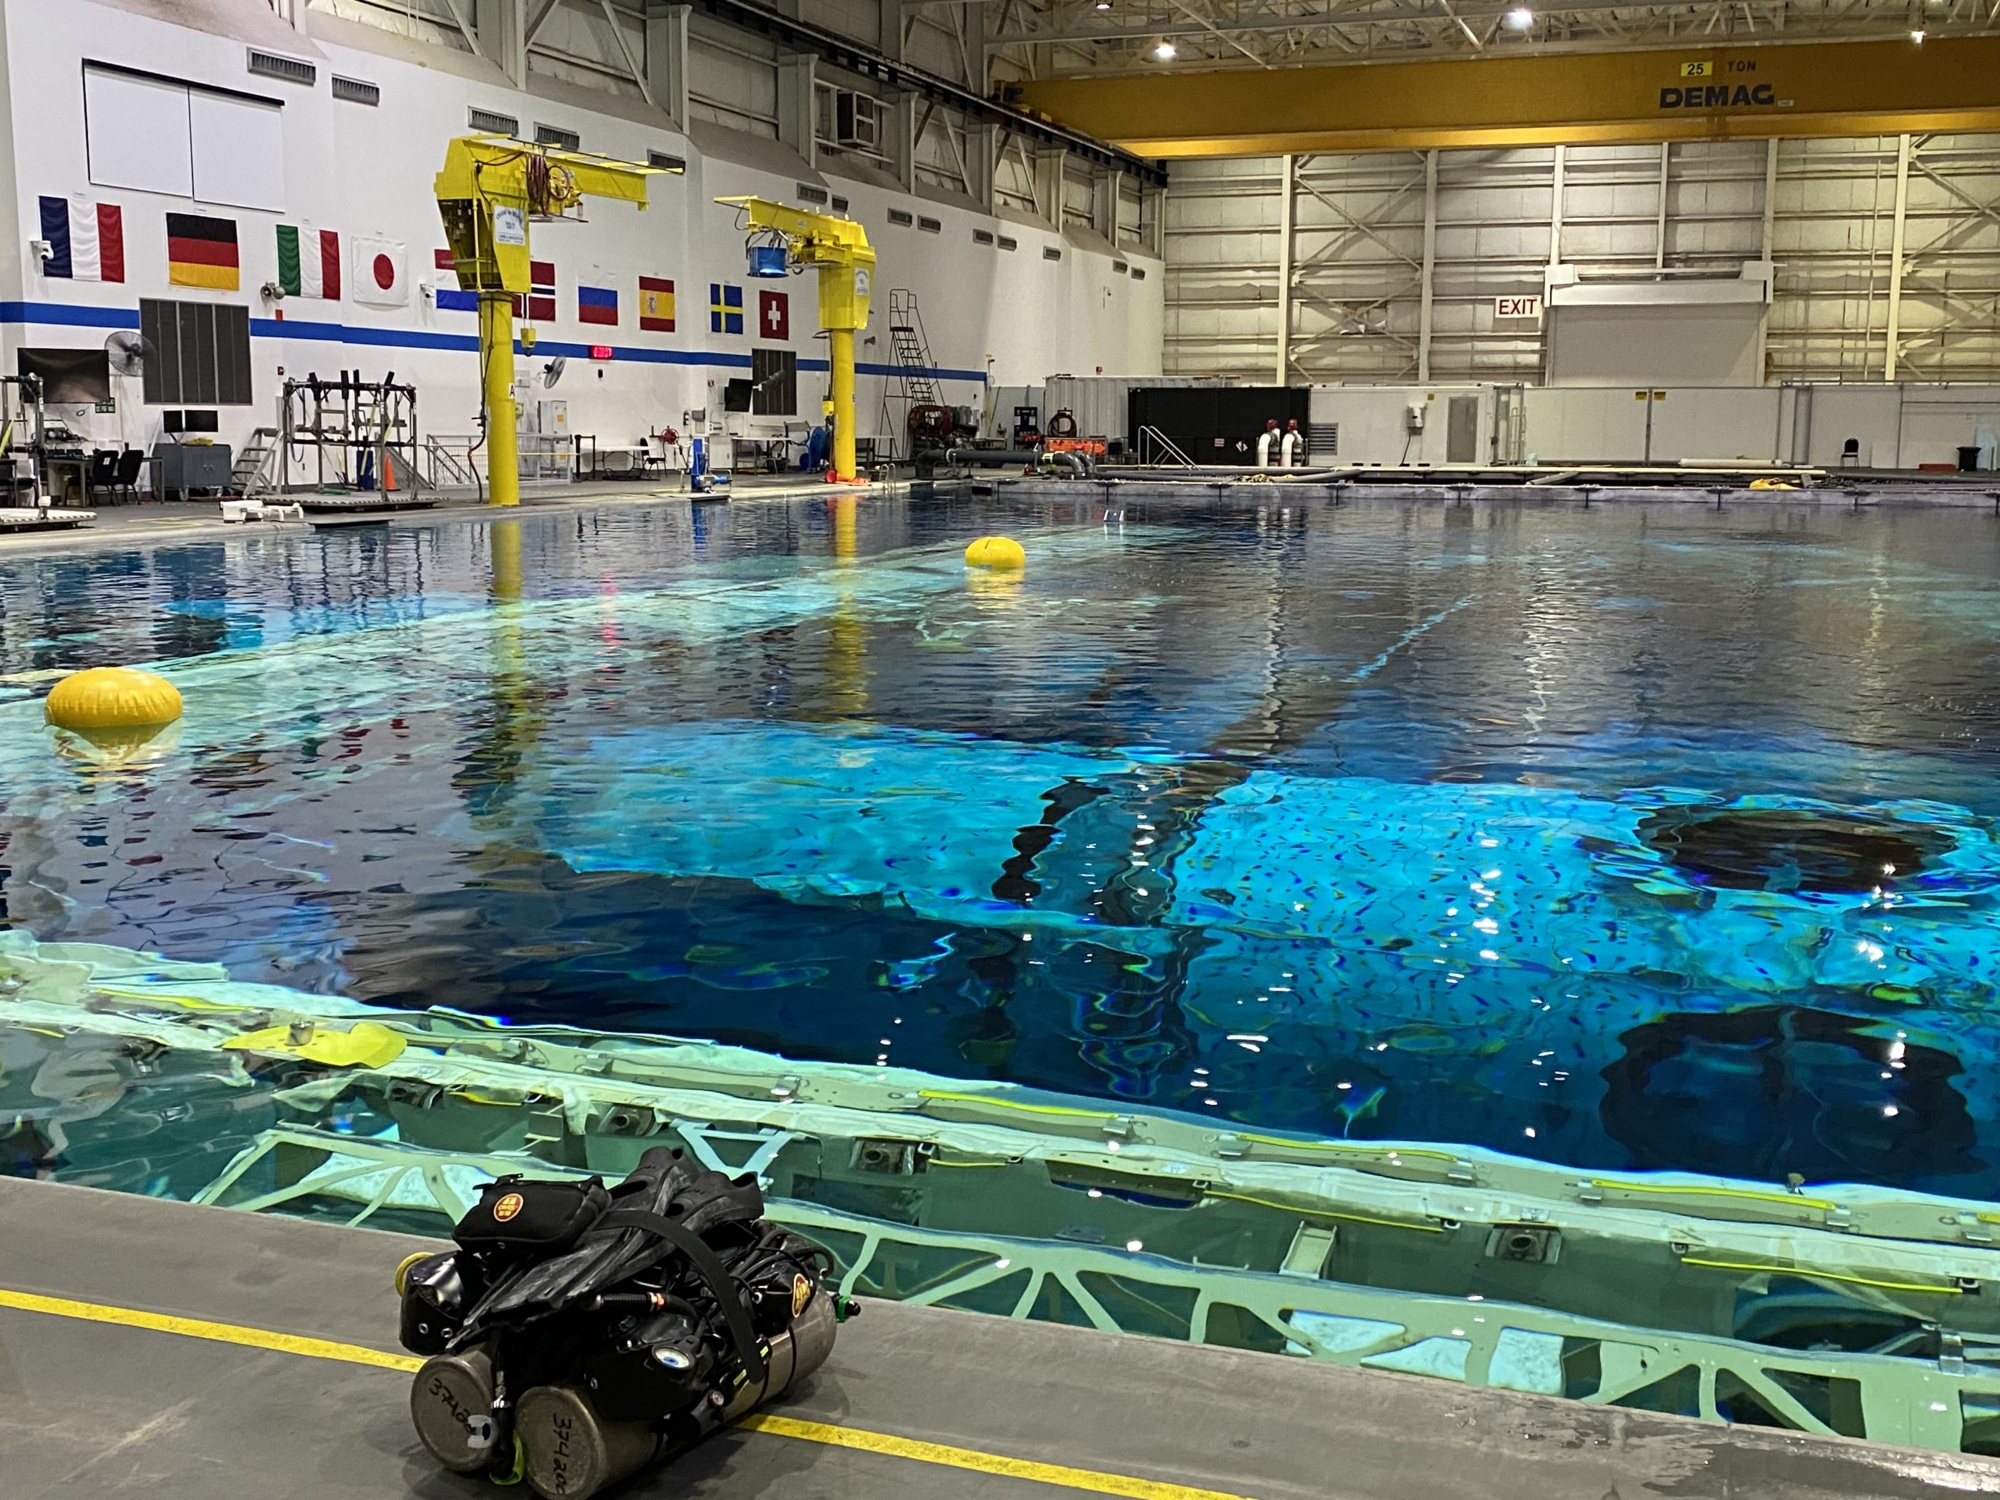 NASA pool with underwater device